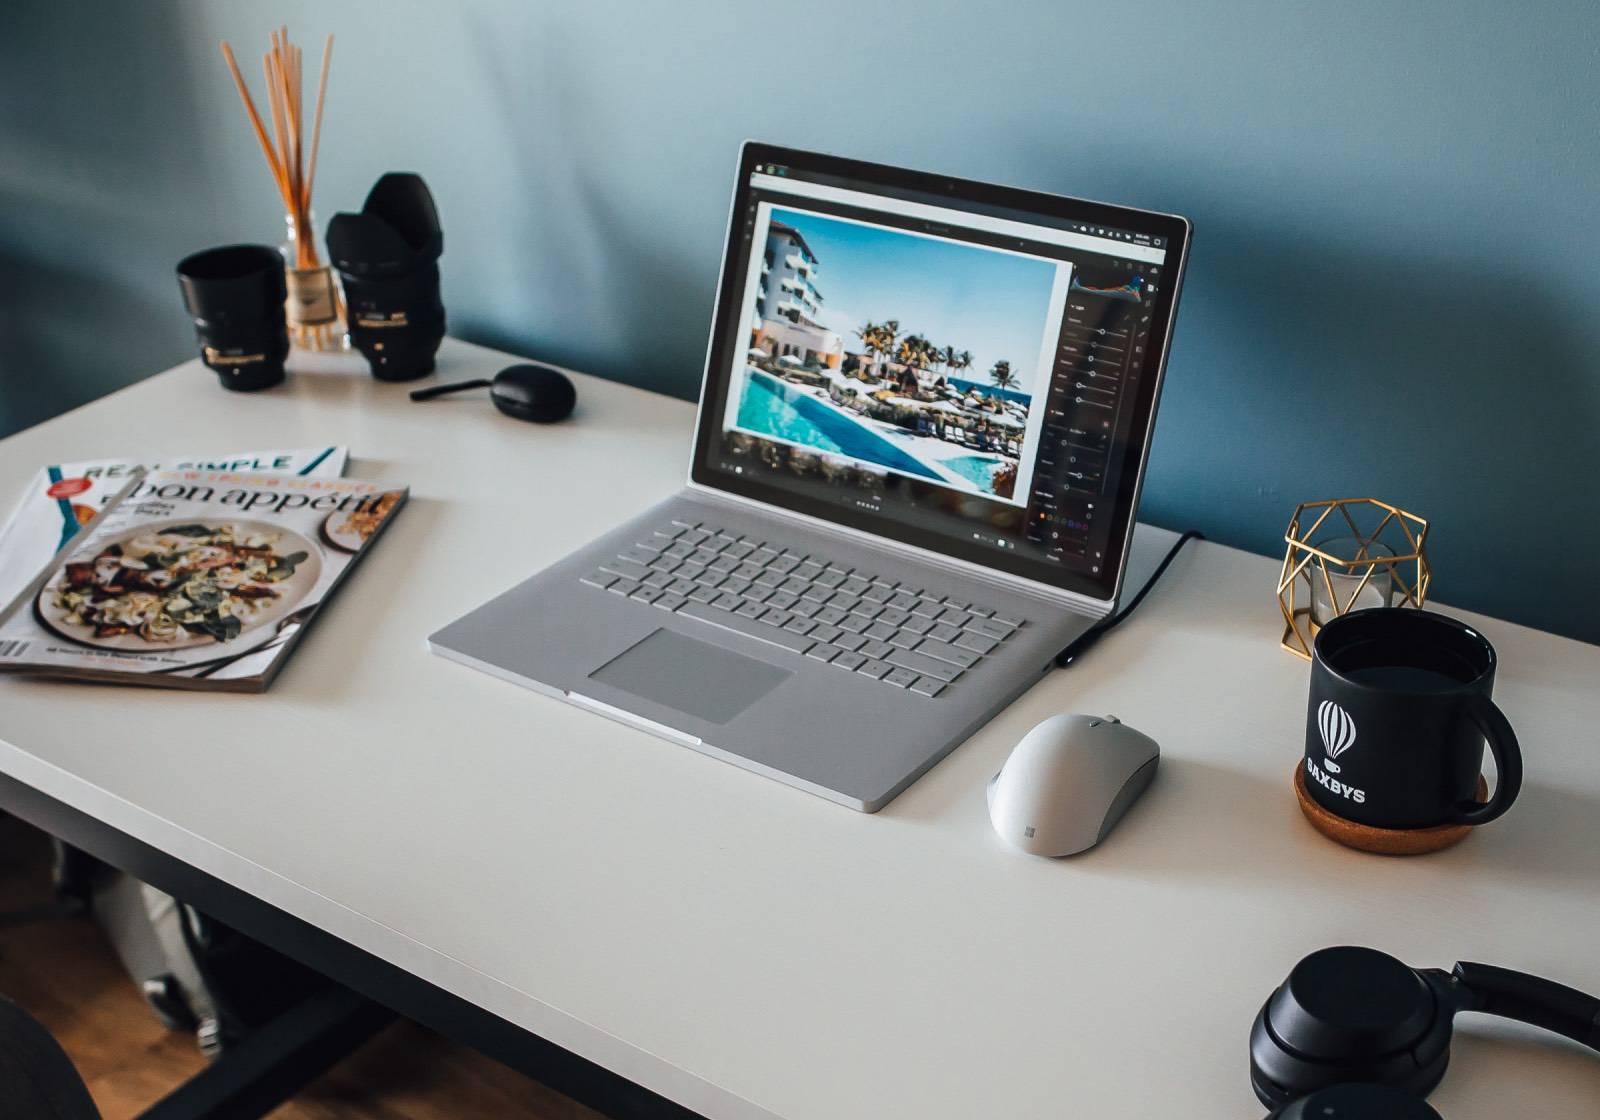 Top 3 Best FREE Photo Editors for Windows in 2021